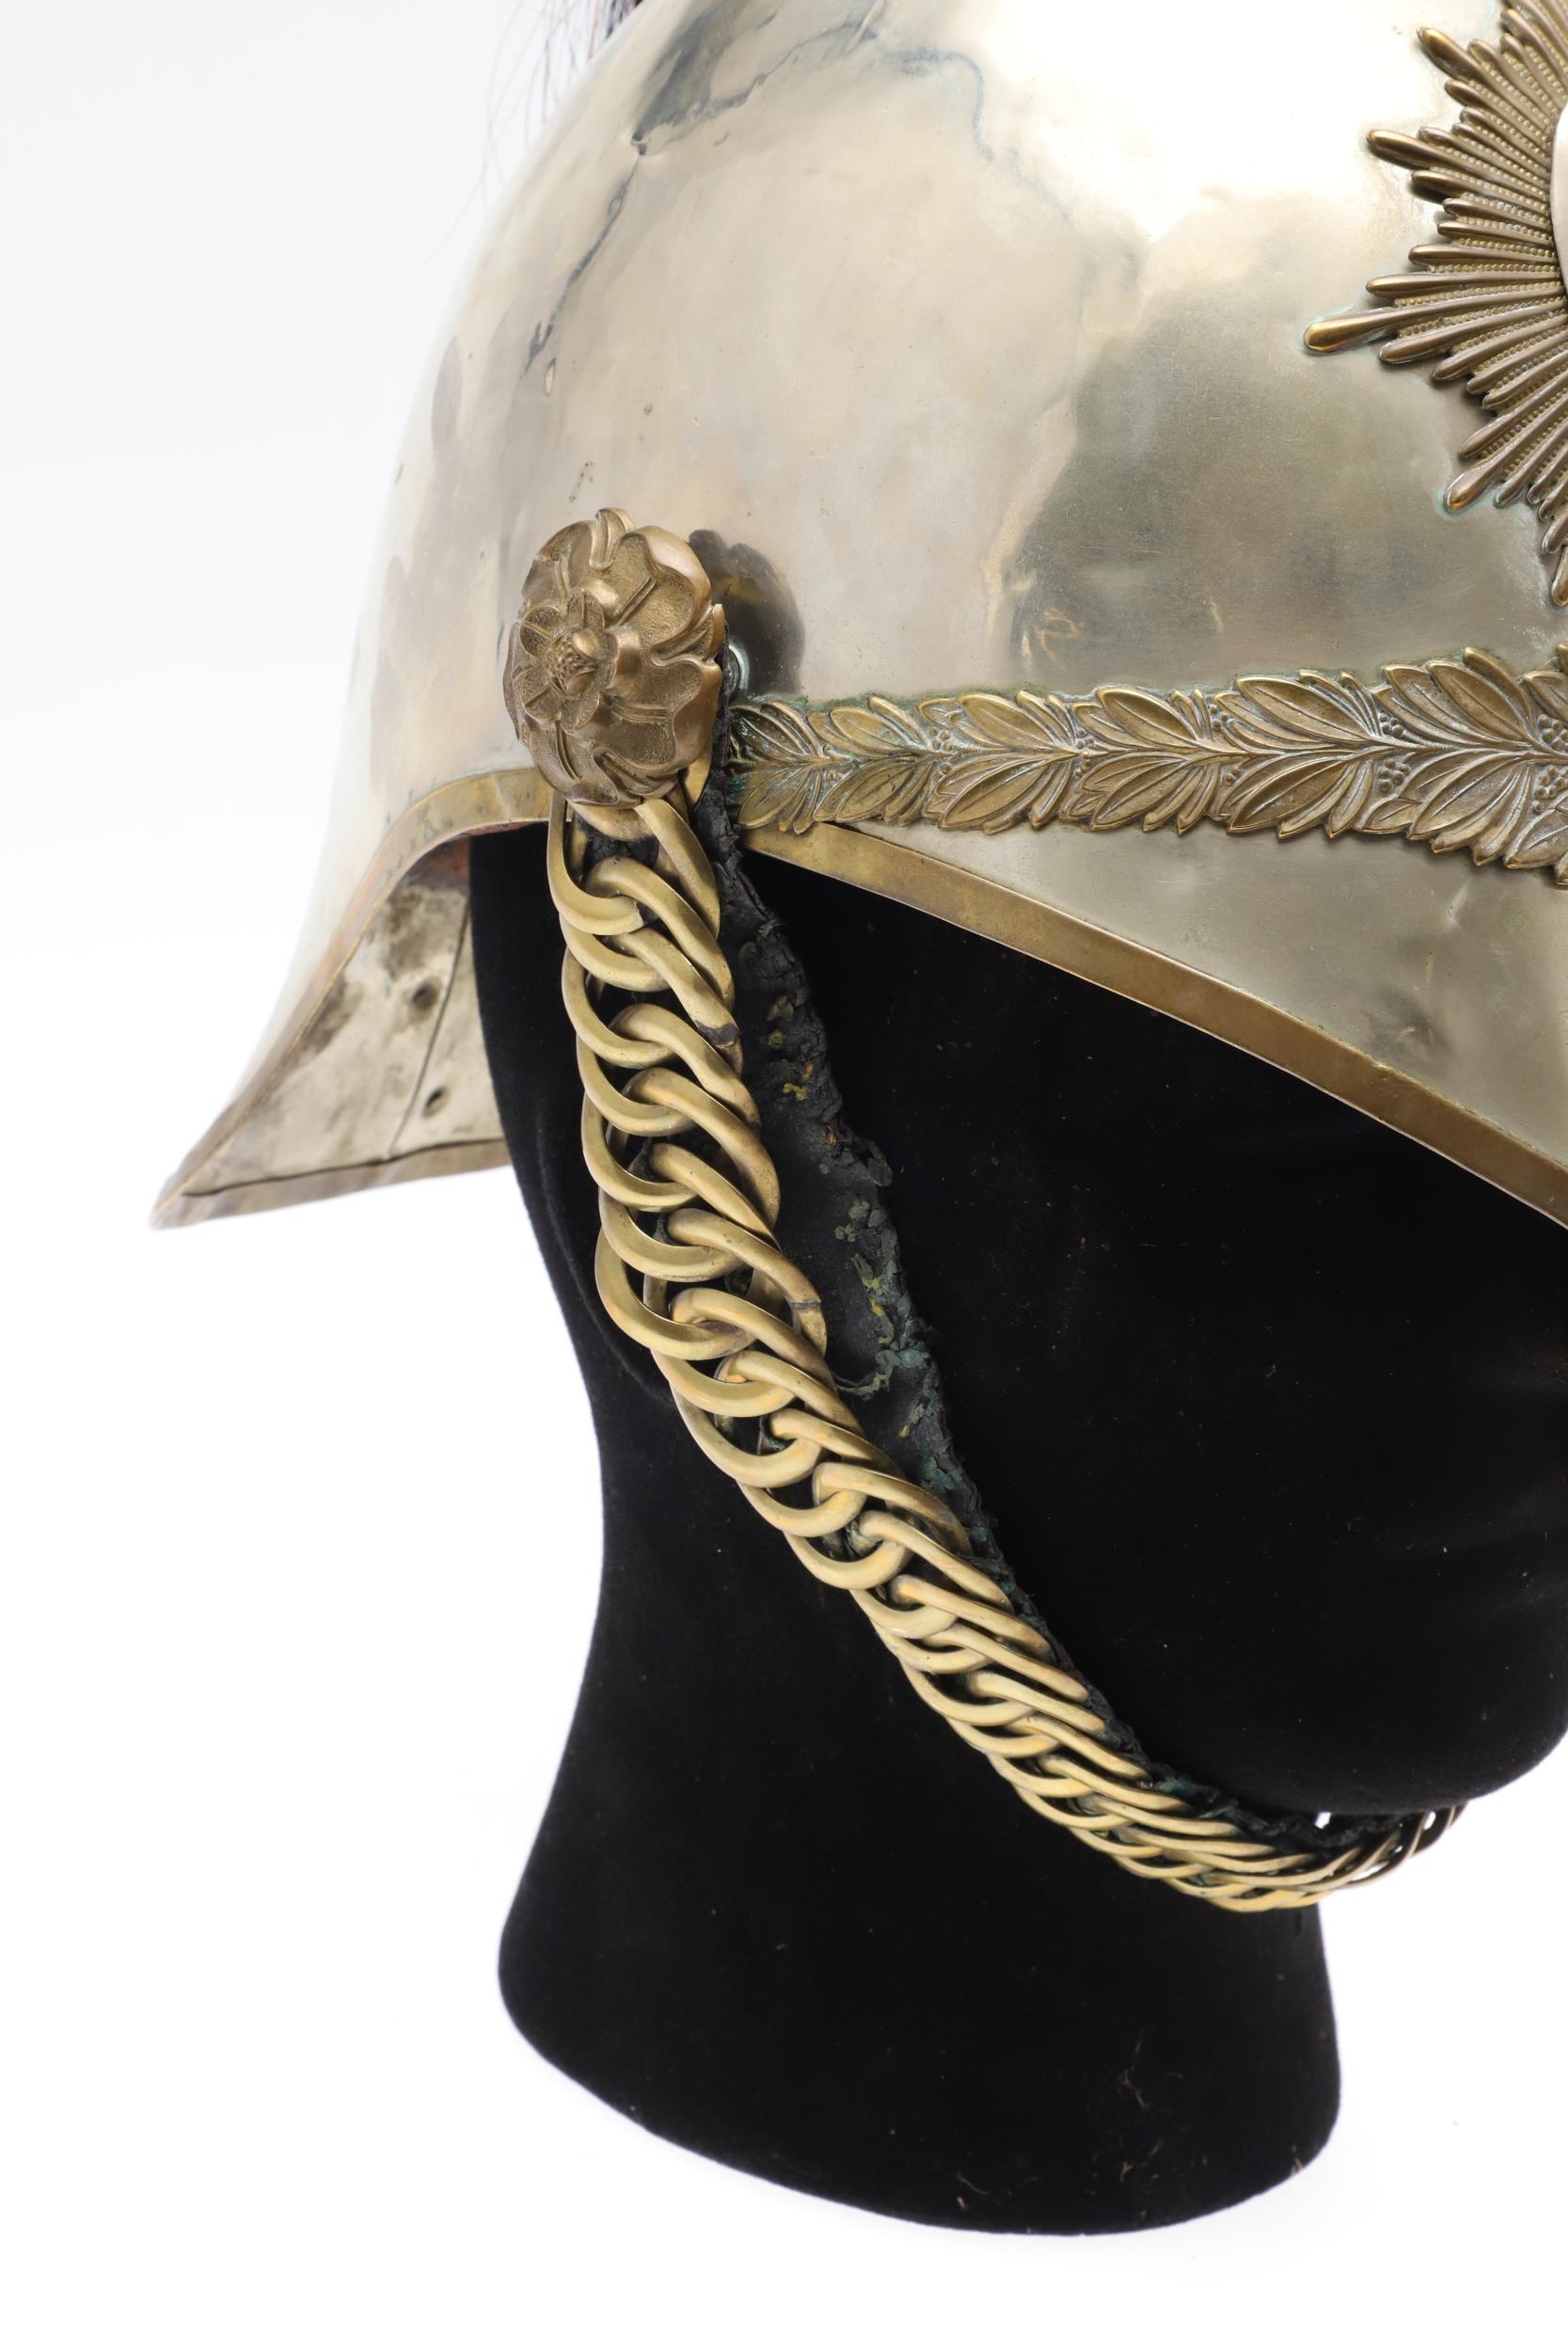 AN 1871 PATTERN HELMET WITH 1ST KING'S DRAGOON GUARDS HELMET PLATE. - Image 7 of 14